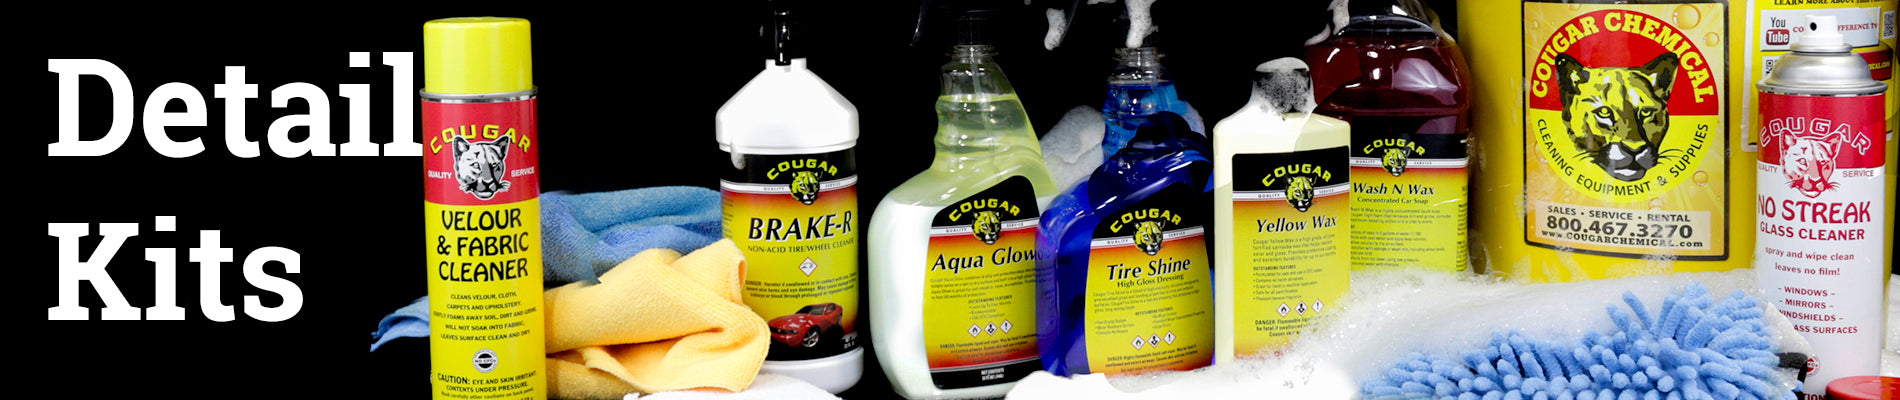 Lifted Truck Detailing & Restoration Kit – a2 Detail Supply Co.